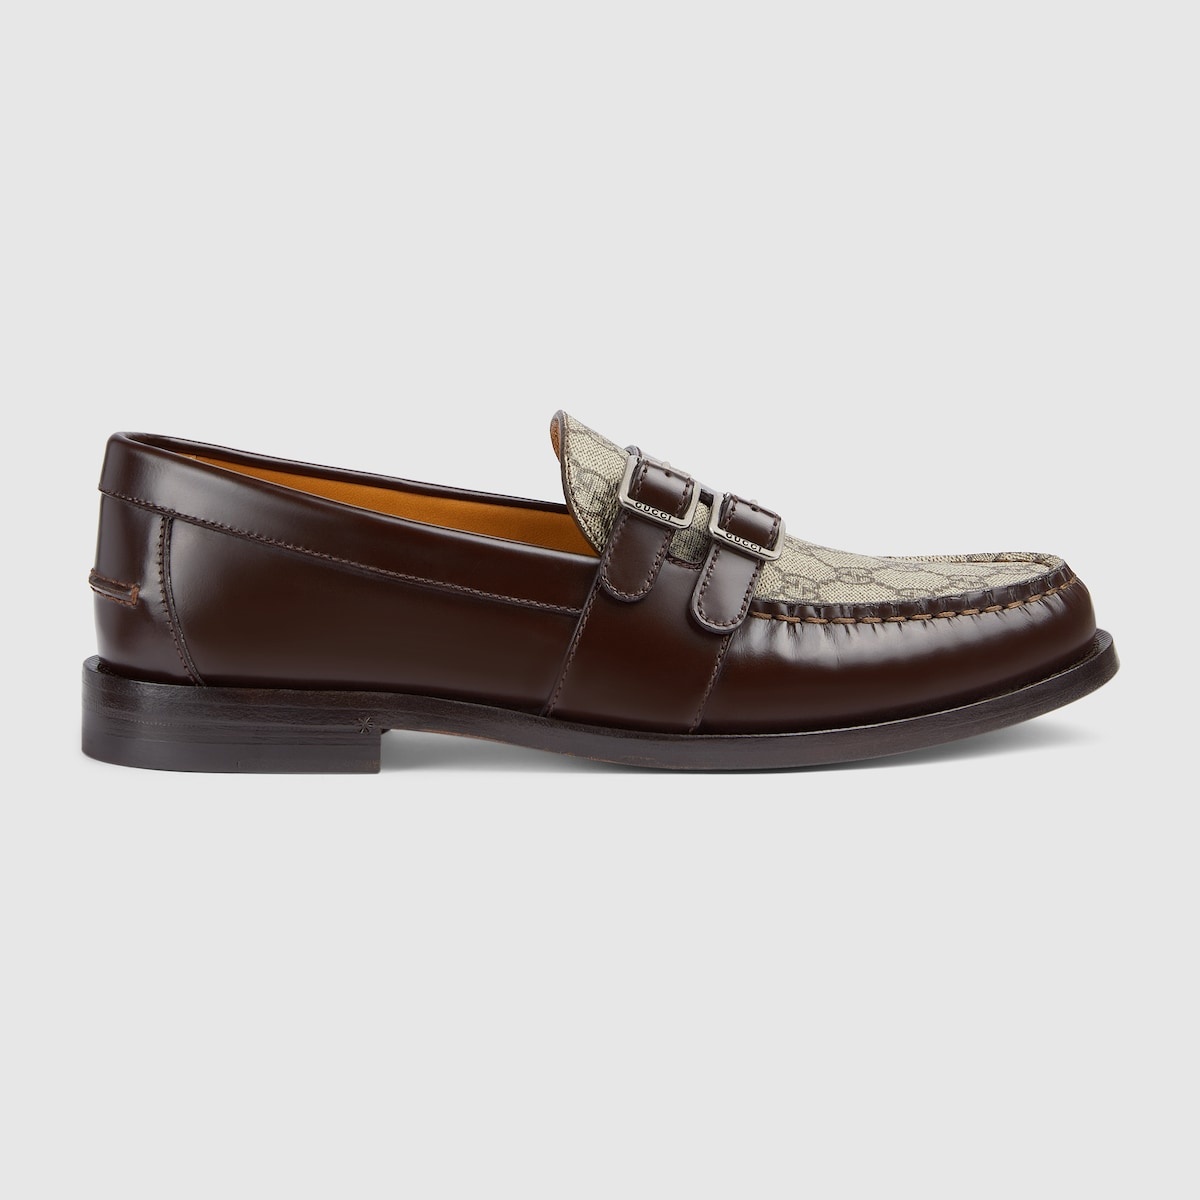 Men's buckle loafer with GG - 1